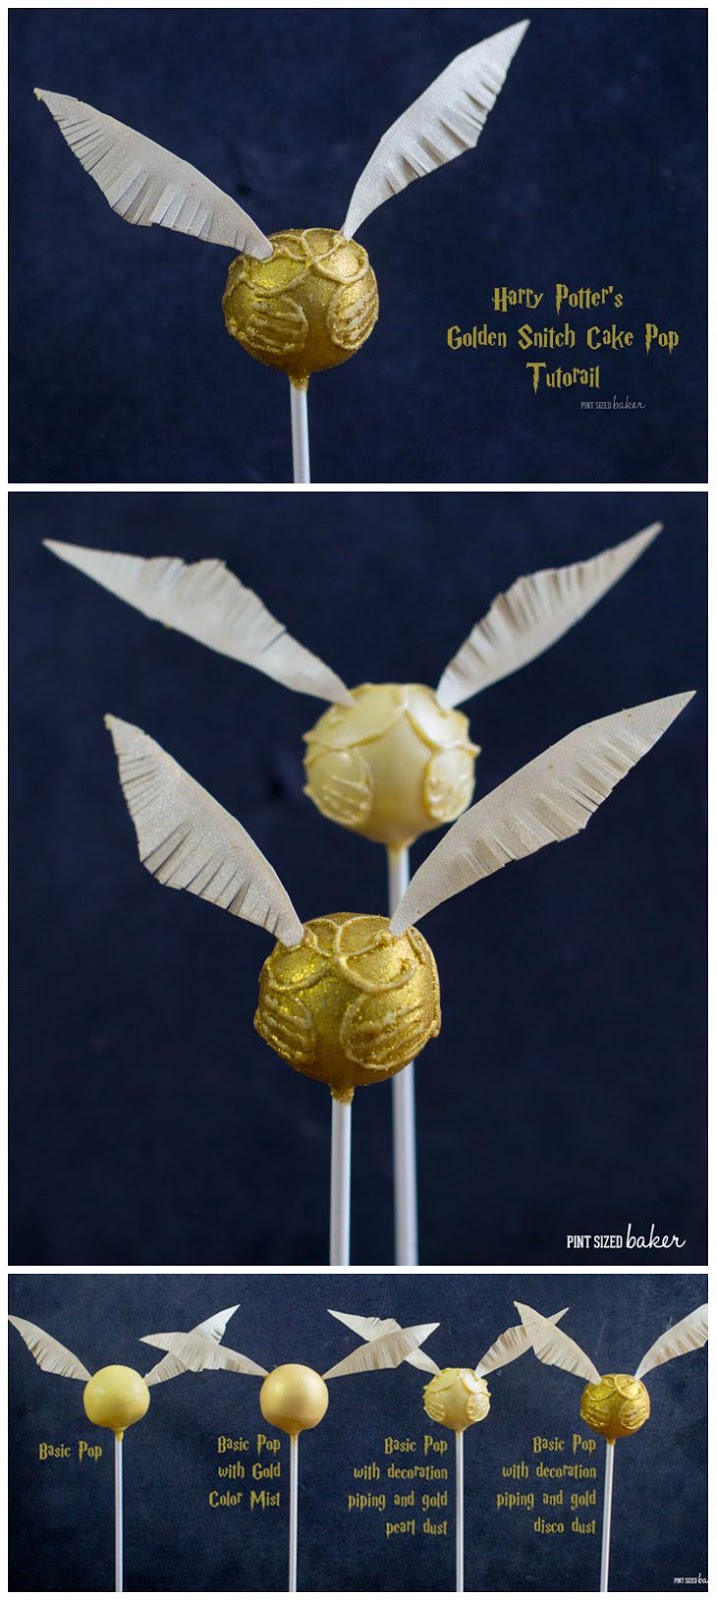 We are having a Harry Potter Party and these Golden Snitch Cake Pops are perfect! I can make a basic pop or add more details for a more intricate design. The instructions to make these are at Pint Sized Baker.